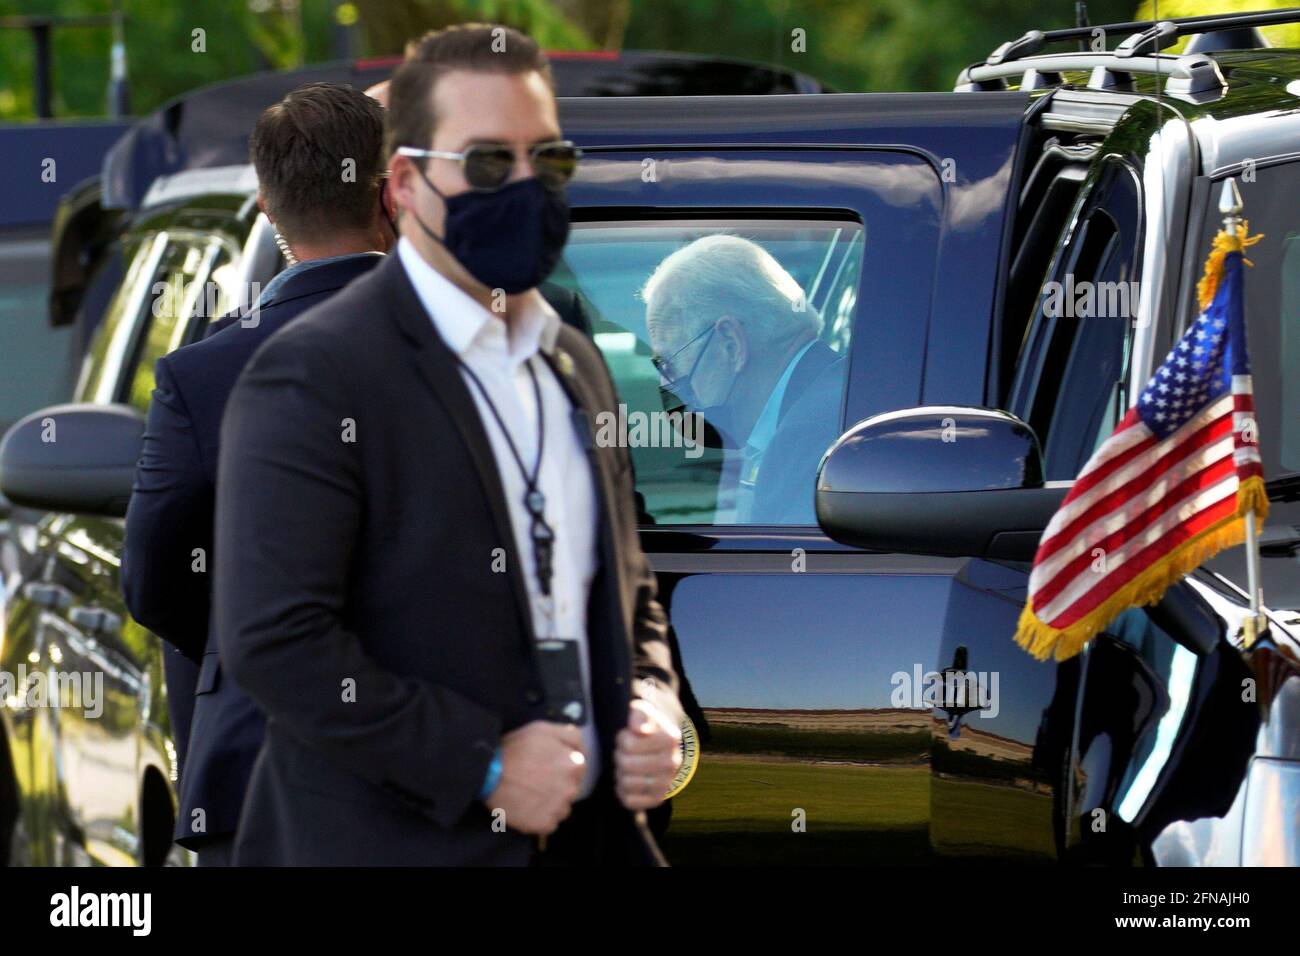 U.S. President Joe Biden wears a face mask as he arrives for departure from the White House en route to Wilmington, Delaware from the Ellipse in Washington, U.S., May 15, 2021. REUTERS/Yuri Gripas Stock Photo